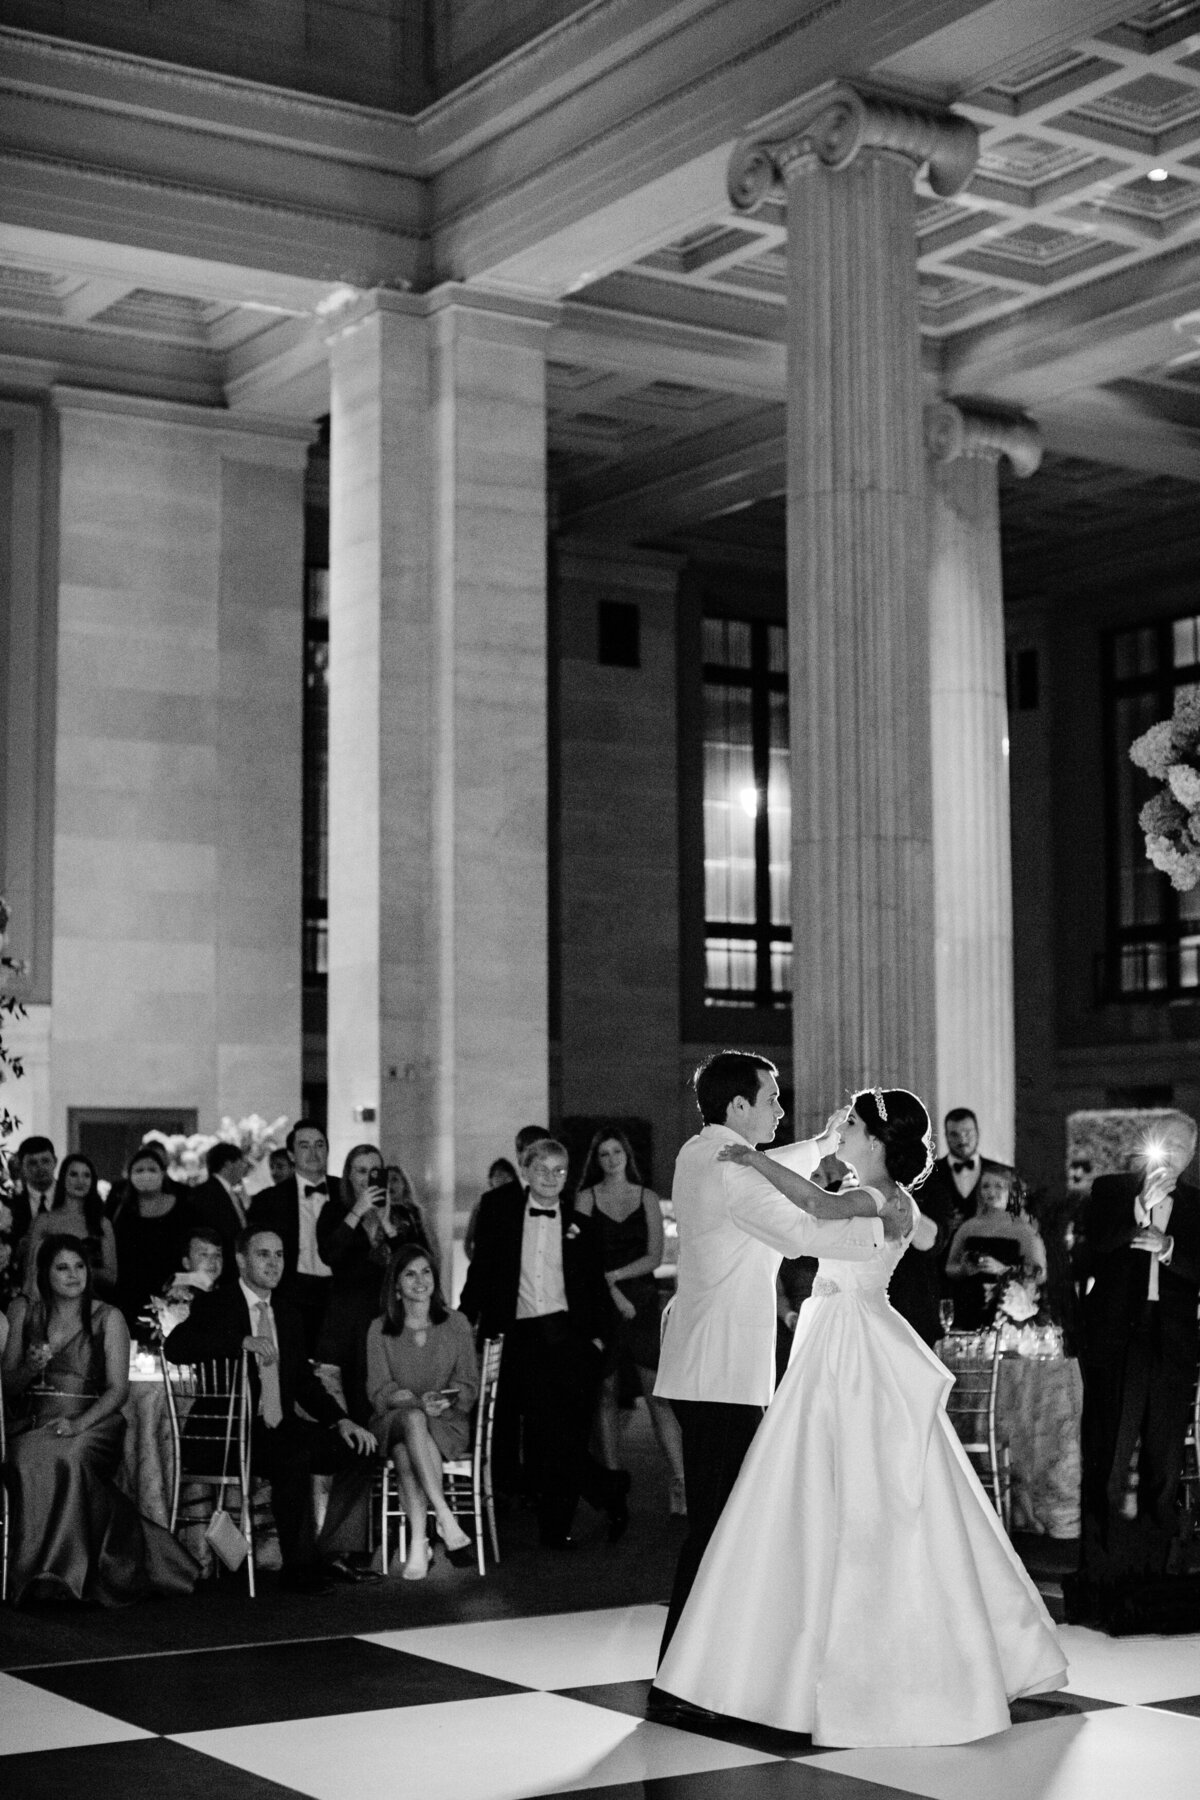 Couple dancing at their wedding reception